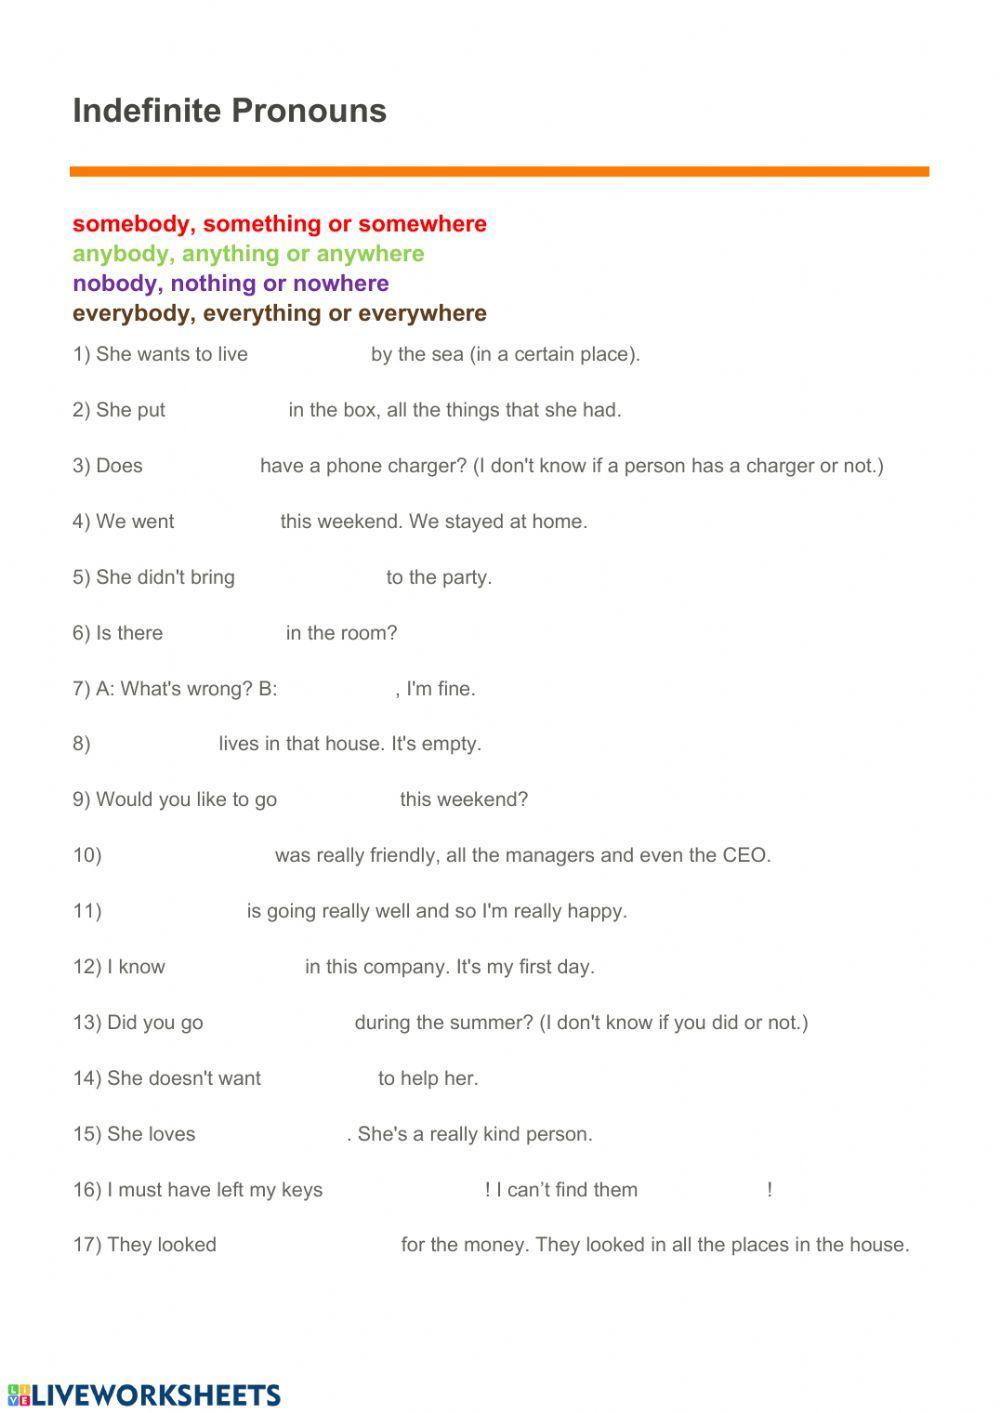 Indefinite Pronouns, Some, Every, No, Any 